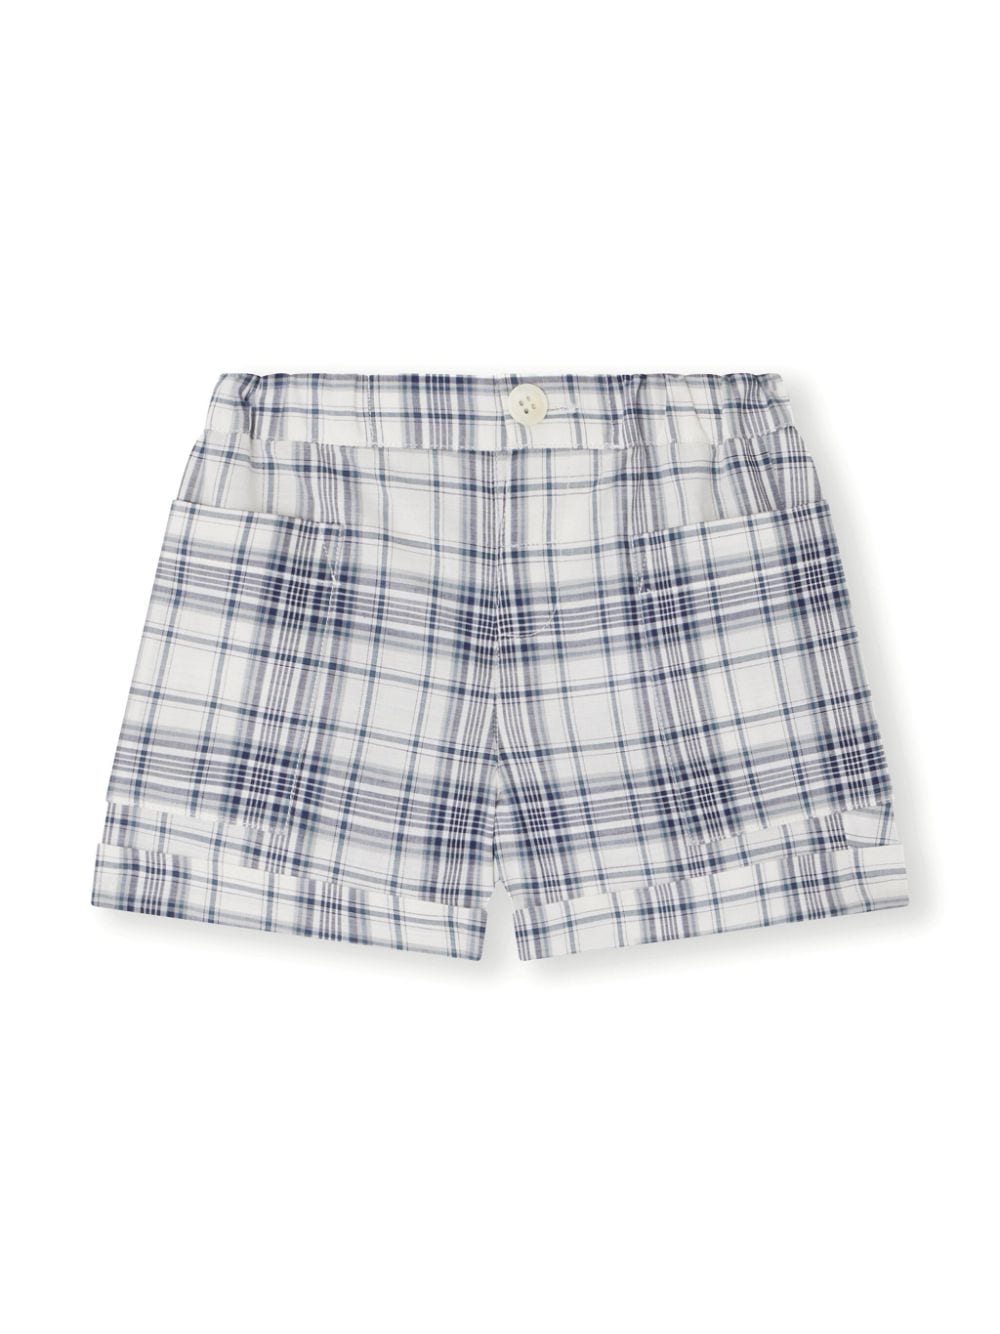 Bonpoint Babies' Nateo Checked Cotton Shorts In White